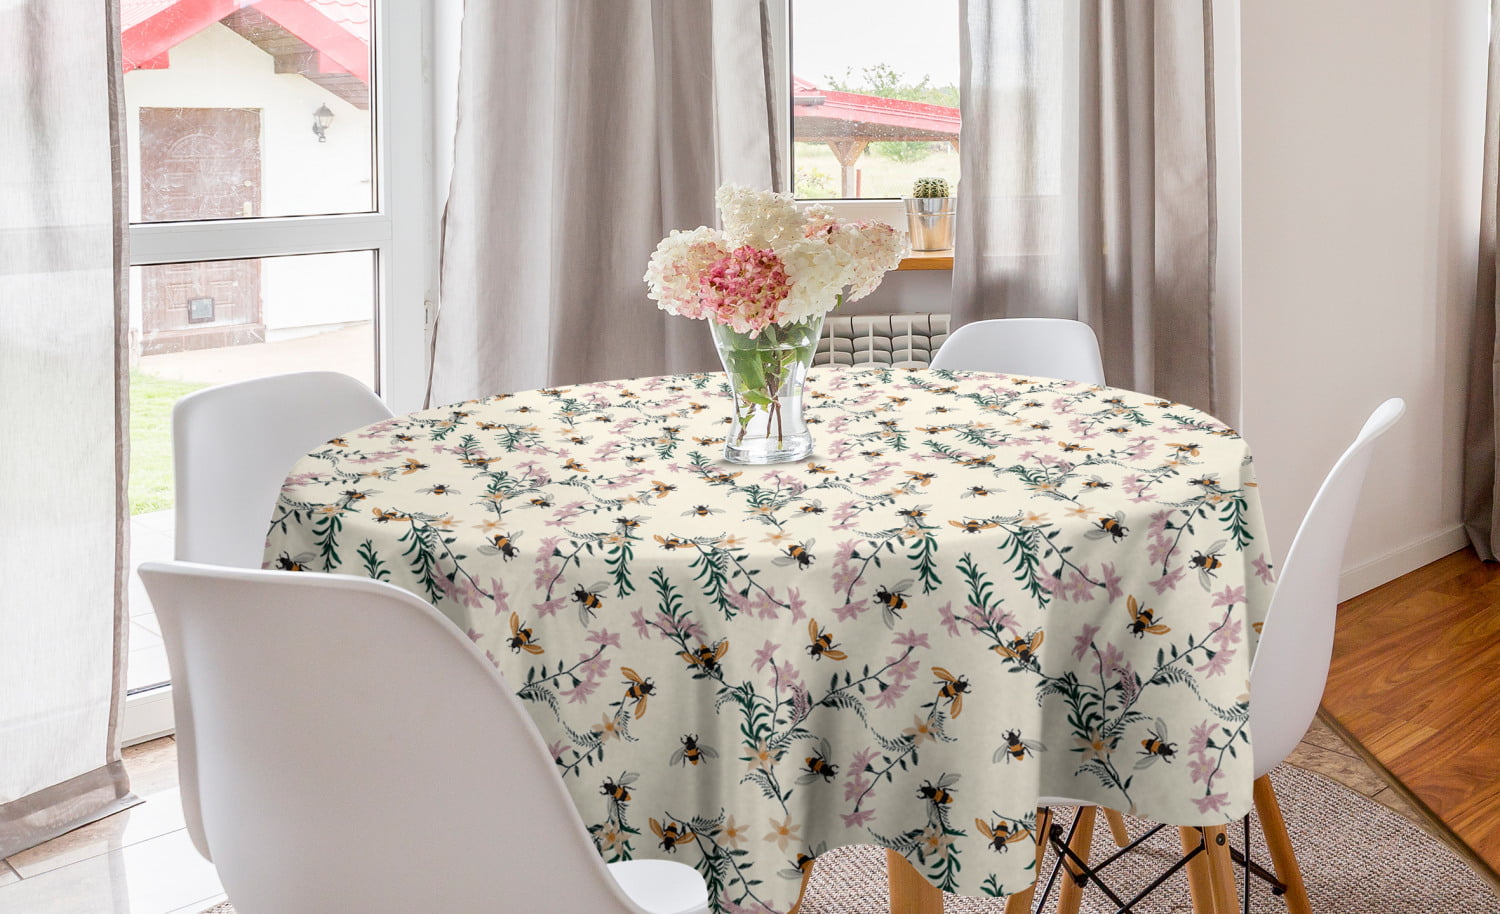 Cactus Flowers Green Q-Beans Decorative Table Runner Washable and Reusable for Kitchen Indoor and Outdoor Size: 16 x 90 inch Dining Room